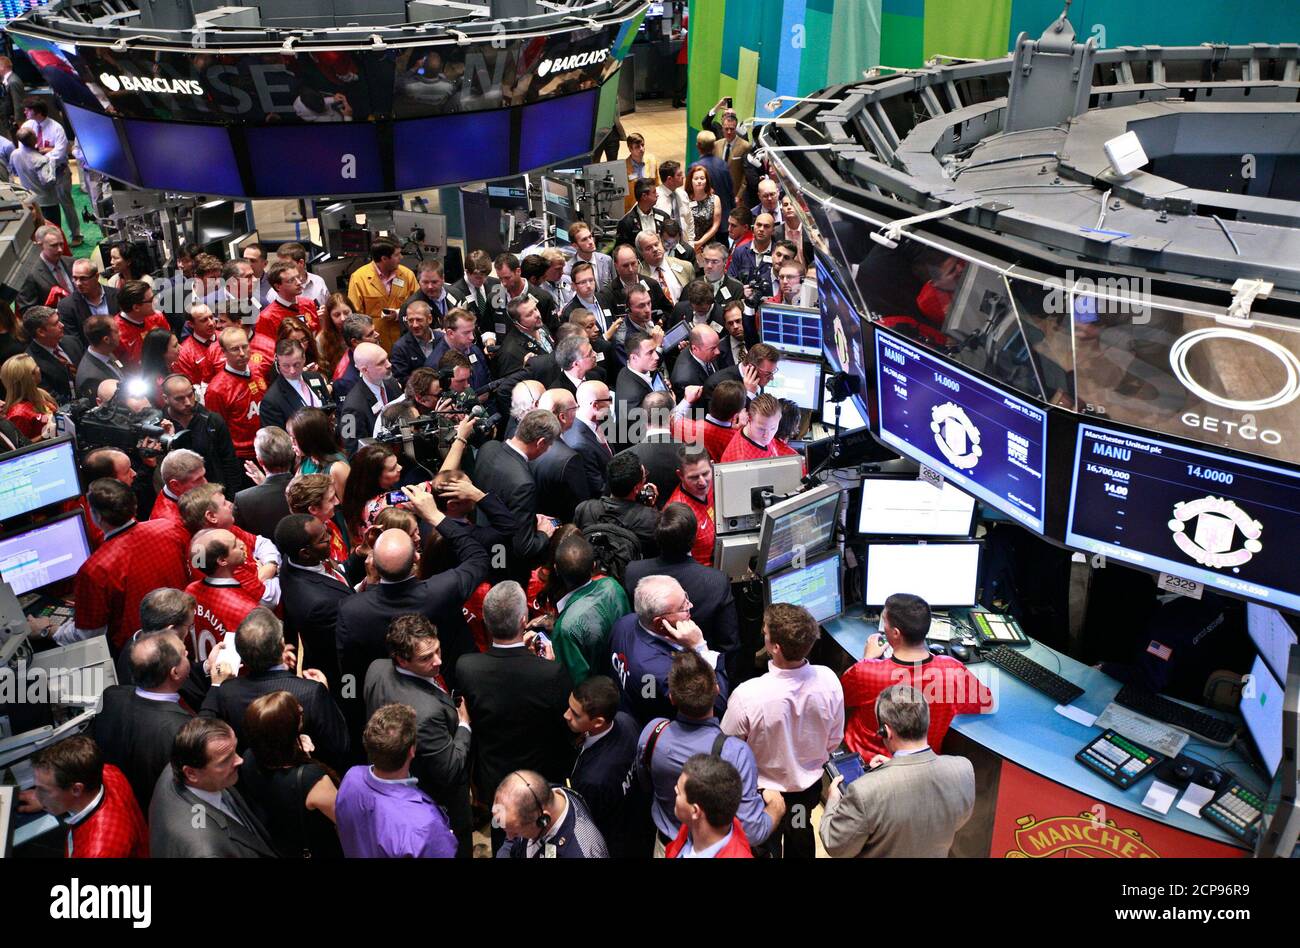 People gather at the post for the start of trading of Manchester United Ltd following it's initial public offering on the floor of the New York Stock Exchange, August 10, 2012. Shares in Manchester United priced below expectations and were essentially flat in early trading on Friday, a disappointing stock market debut for the world's most famous soccer club and most valuable sporting team. REUTERS/Brendan McDermid (UNITED STATES - Tags: BUSINESS SPORT SOCCER) Stock Photo